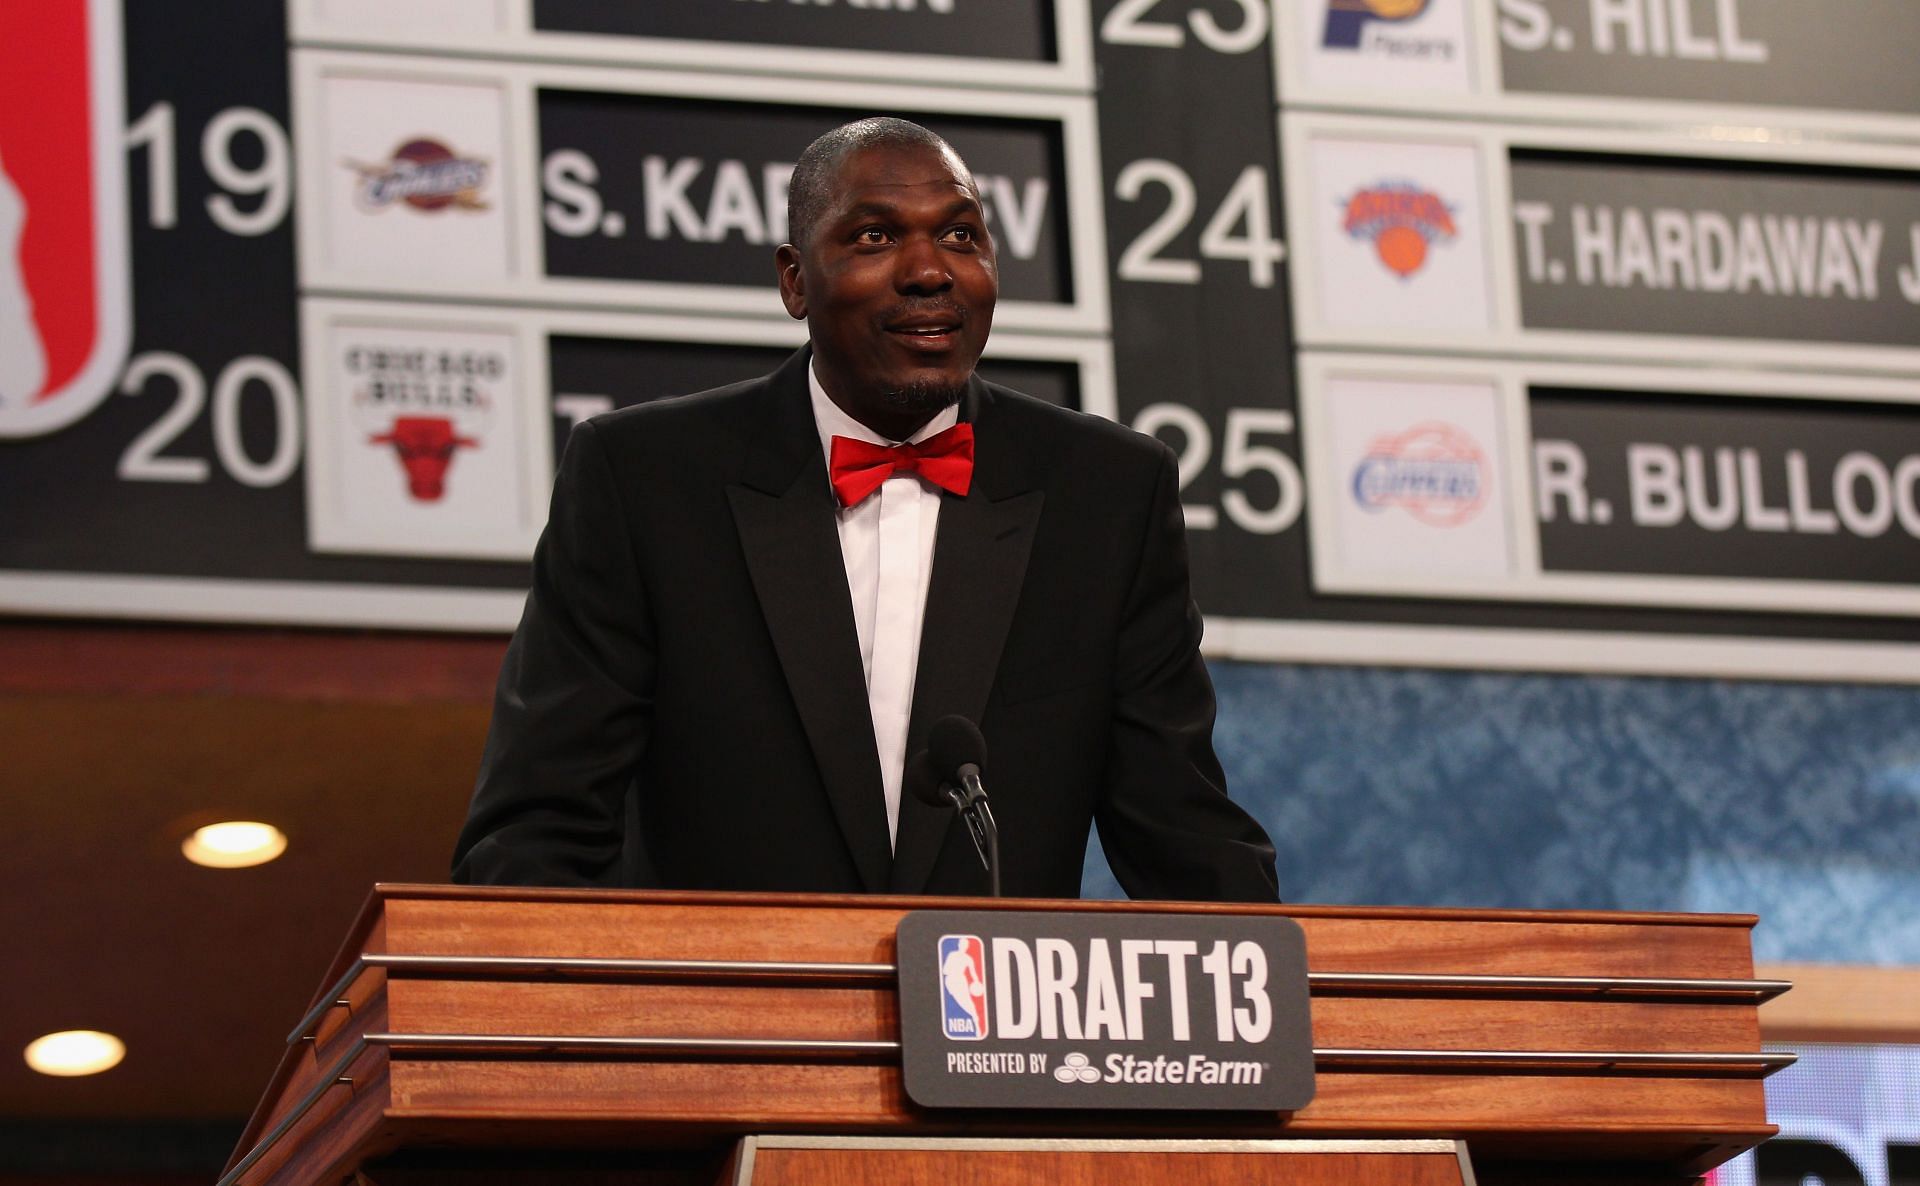 Hakeem Olajuwon speaks on stage during the 2013 NBA Draft at Barclays Center on June 27, 2013 in in the Brooklyn Bourough of New York City.